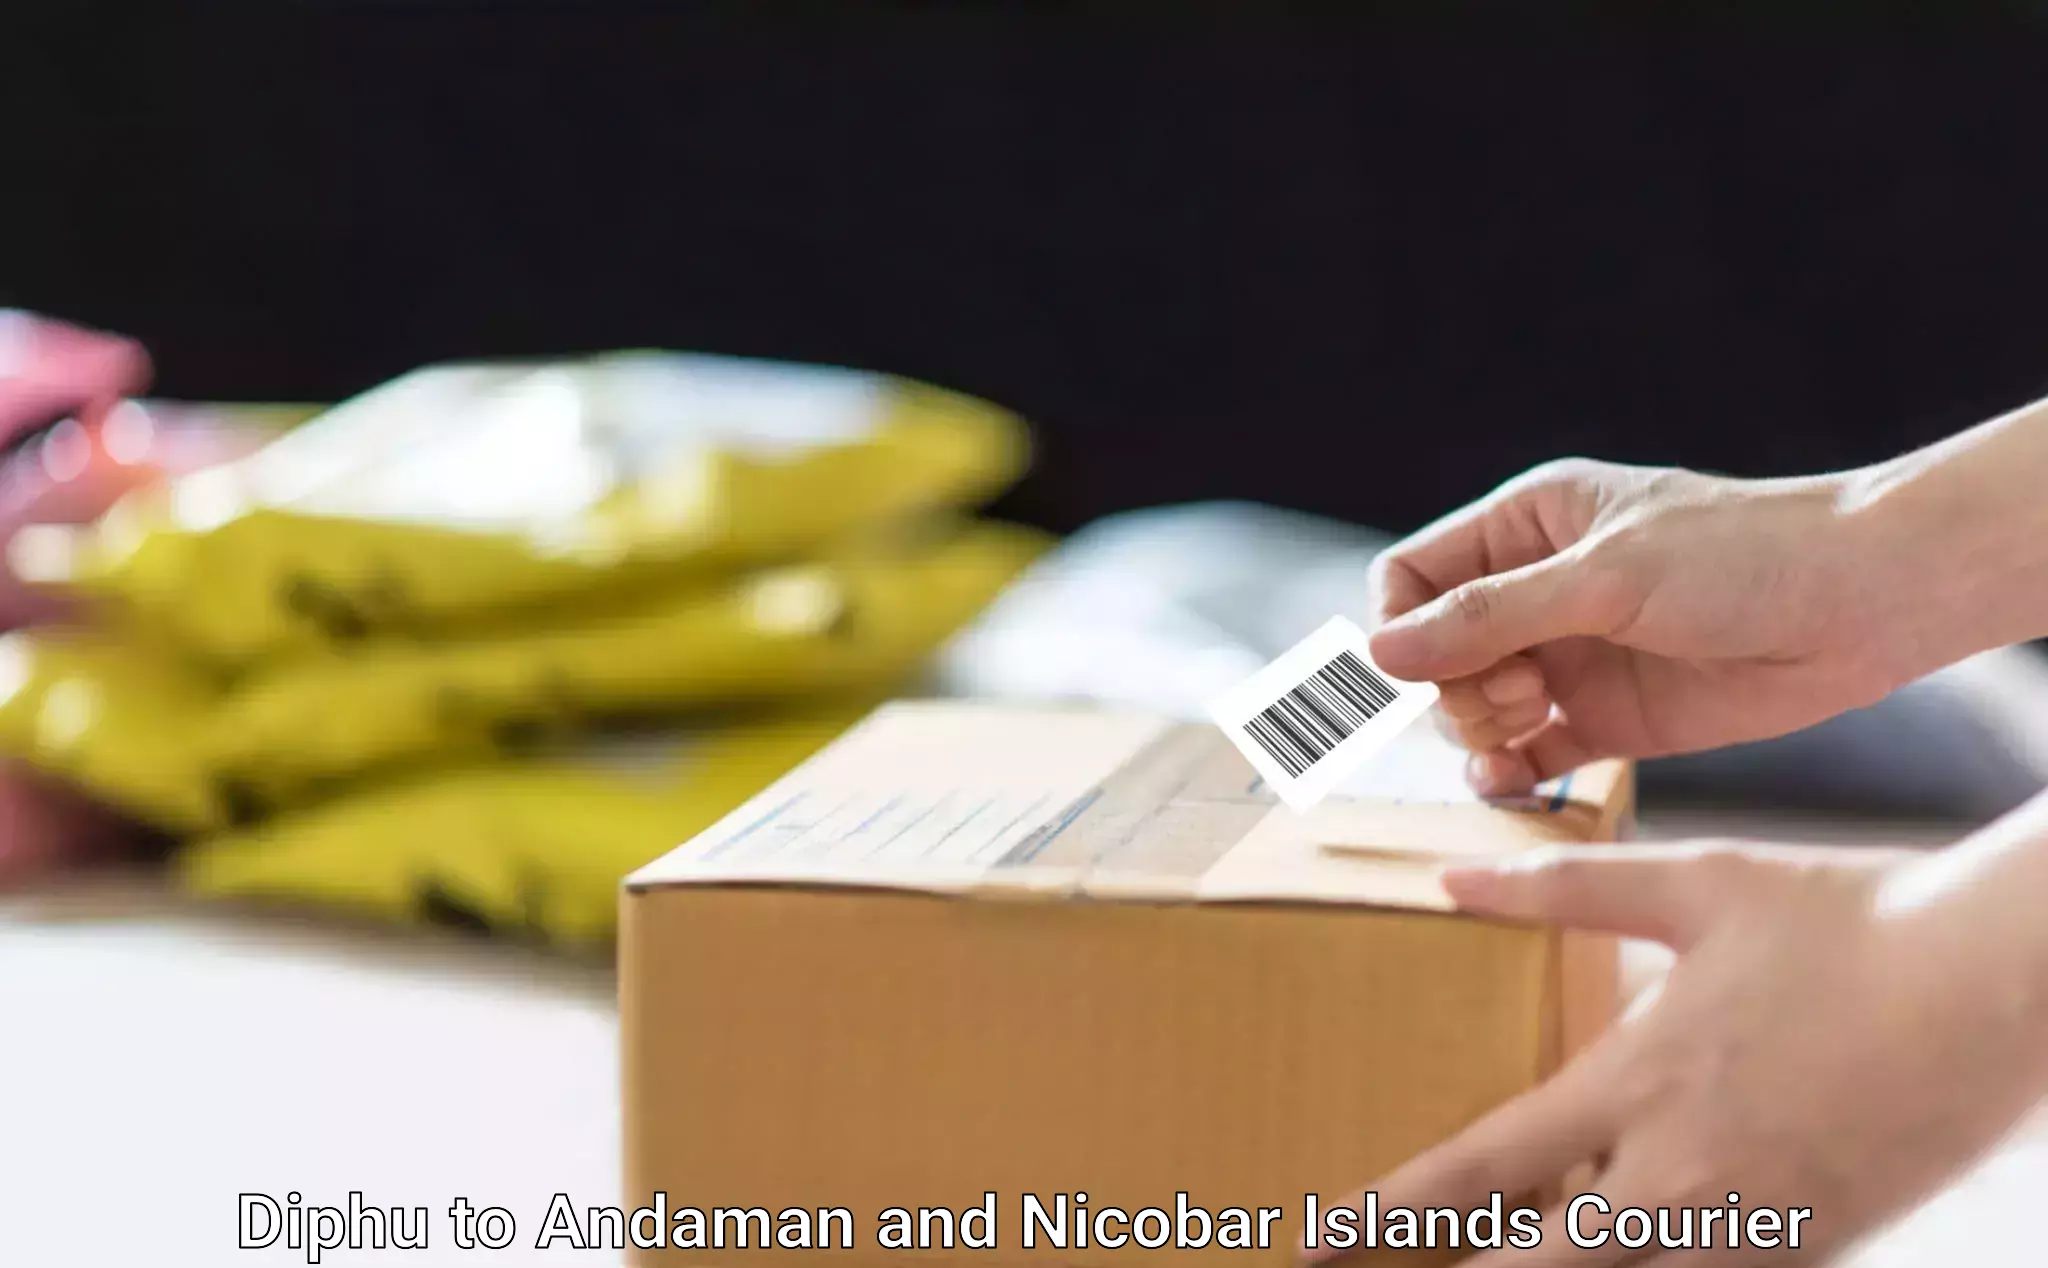 Multi-national courier services Diphu to Andaman and Nicobar Islands